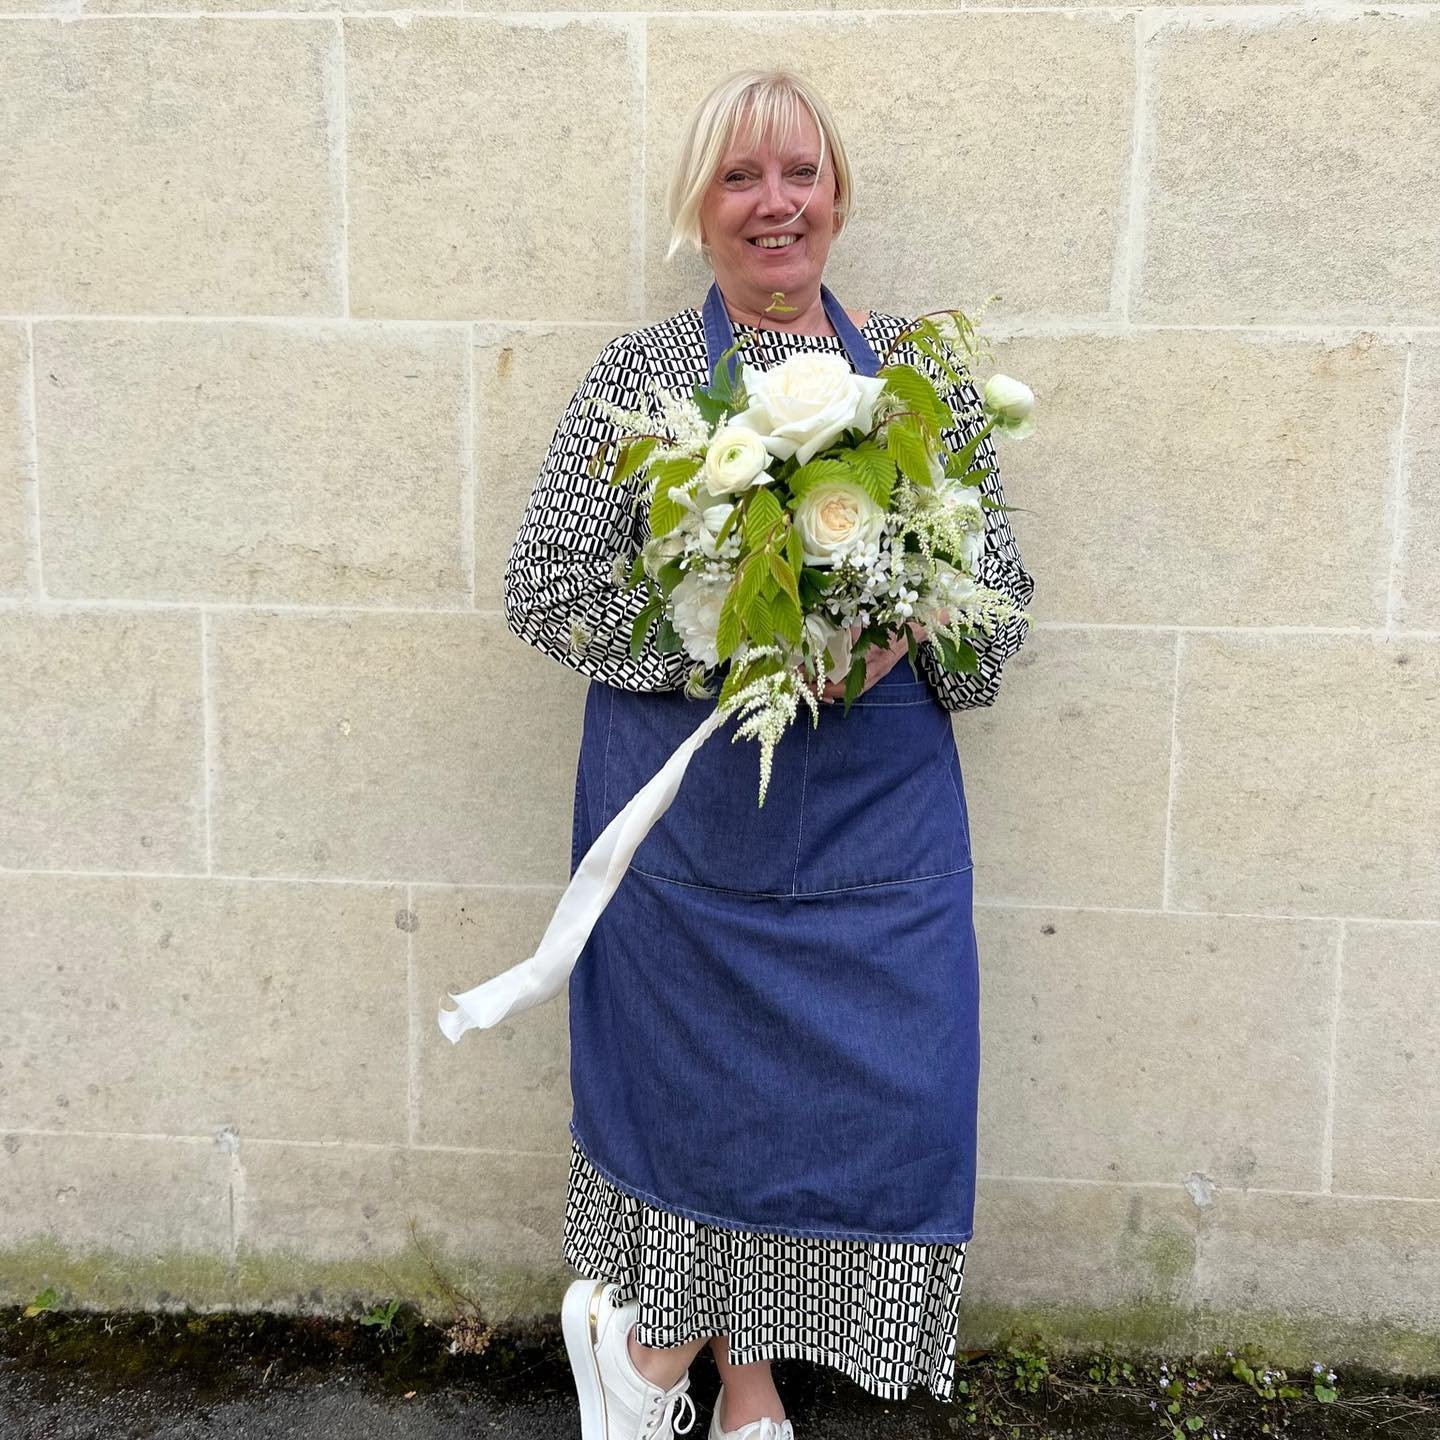 T E S T I M O N I A L  T U E S D A Y

Don&rsquo;t take our word for it. Hear what the students have to say about our courses, us, and our flower school&hellip;

&ldquo;Keen to enhance floristry skills I attended a two week professional floristry cour